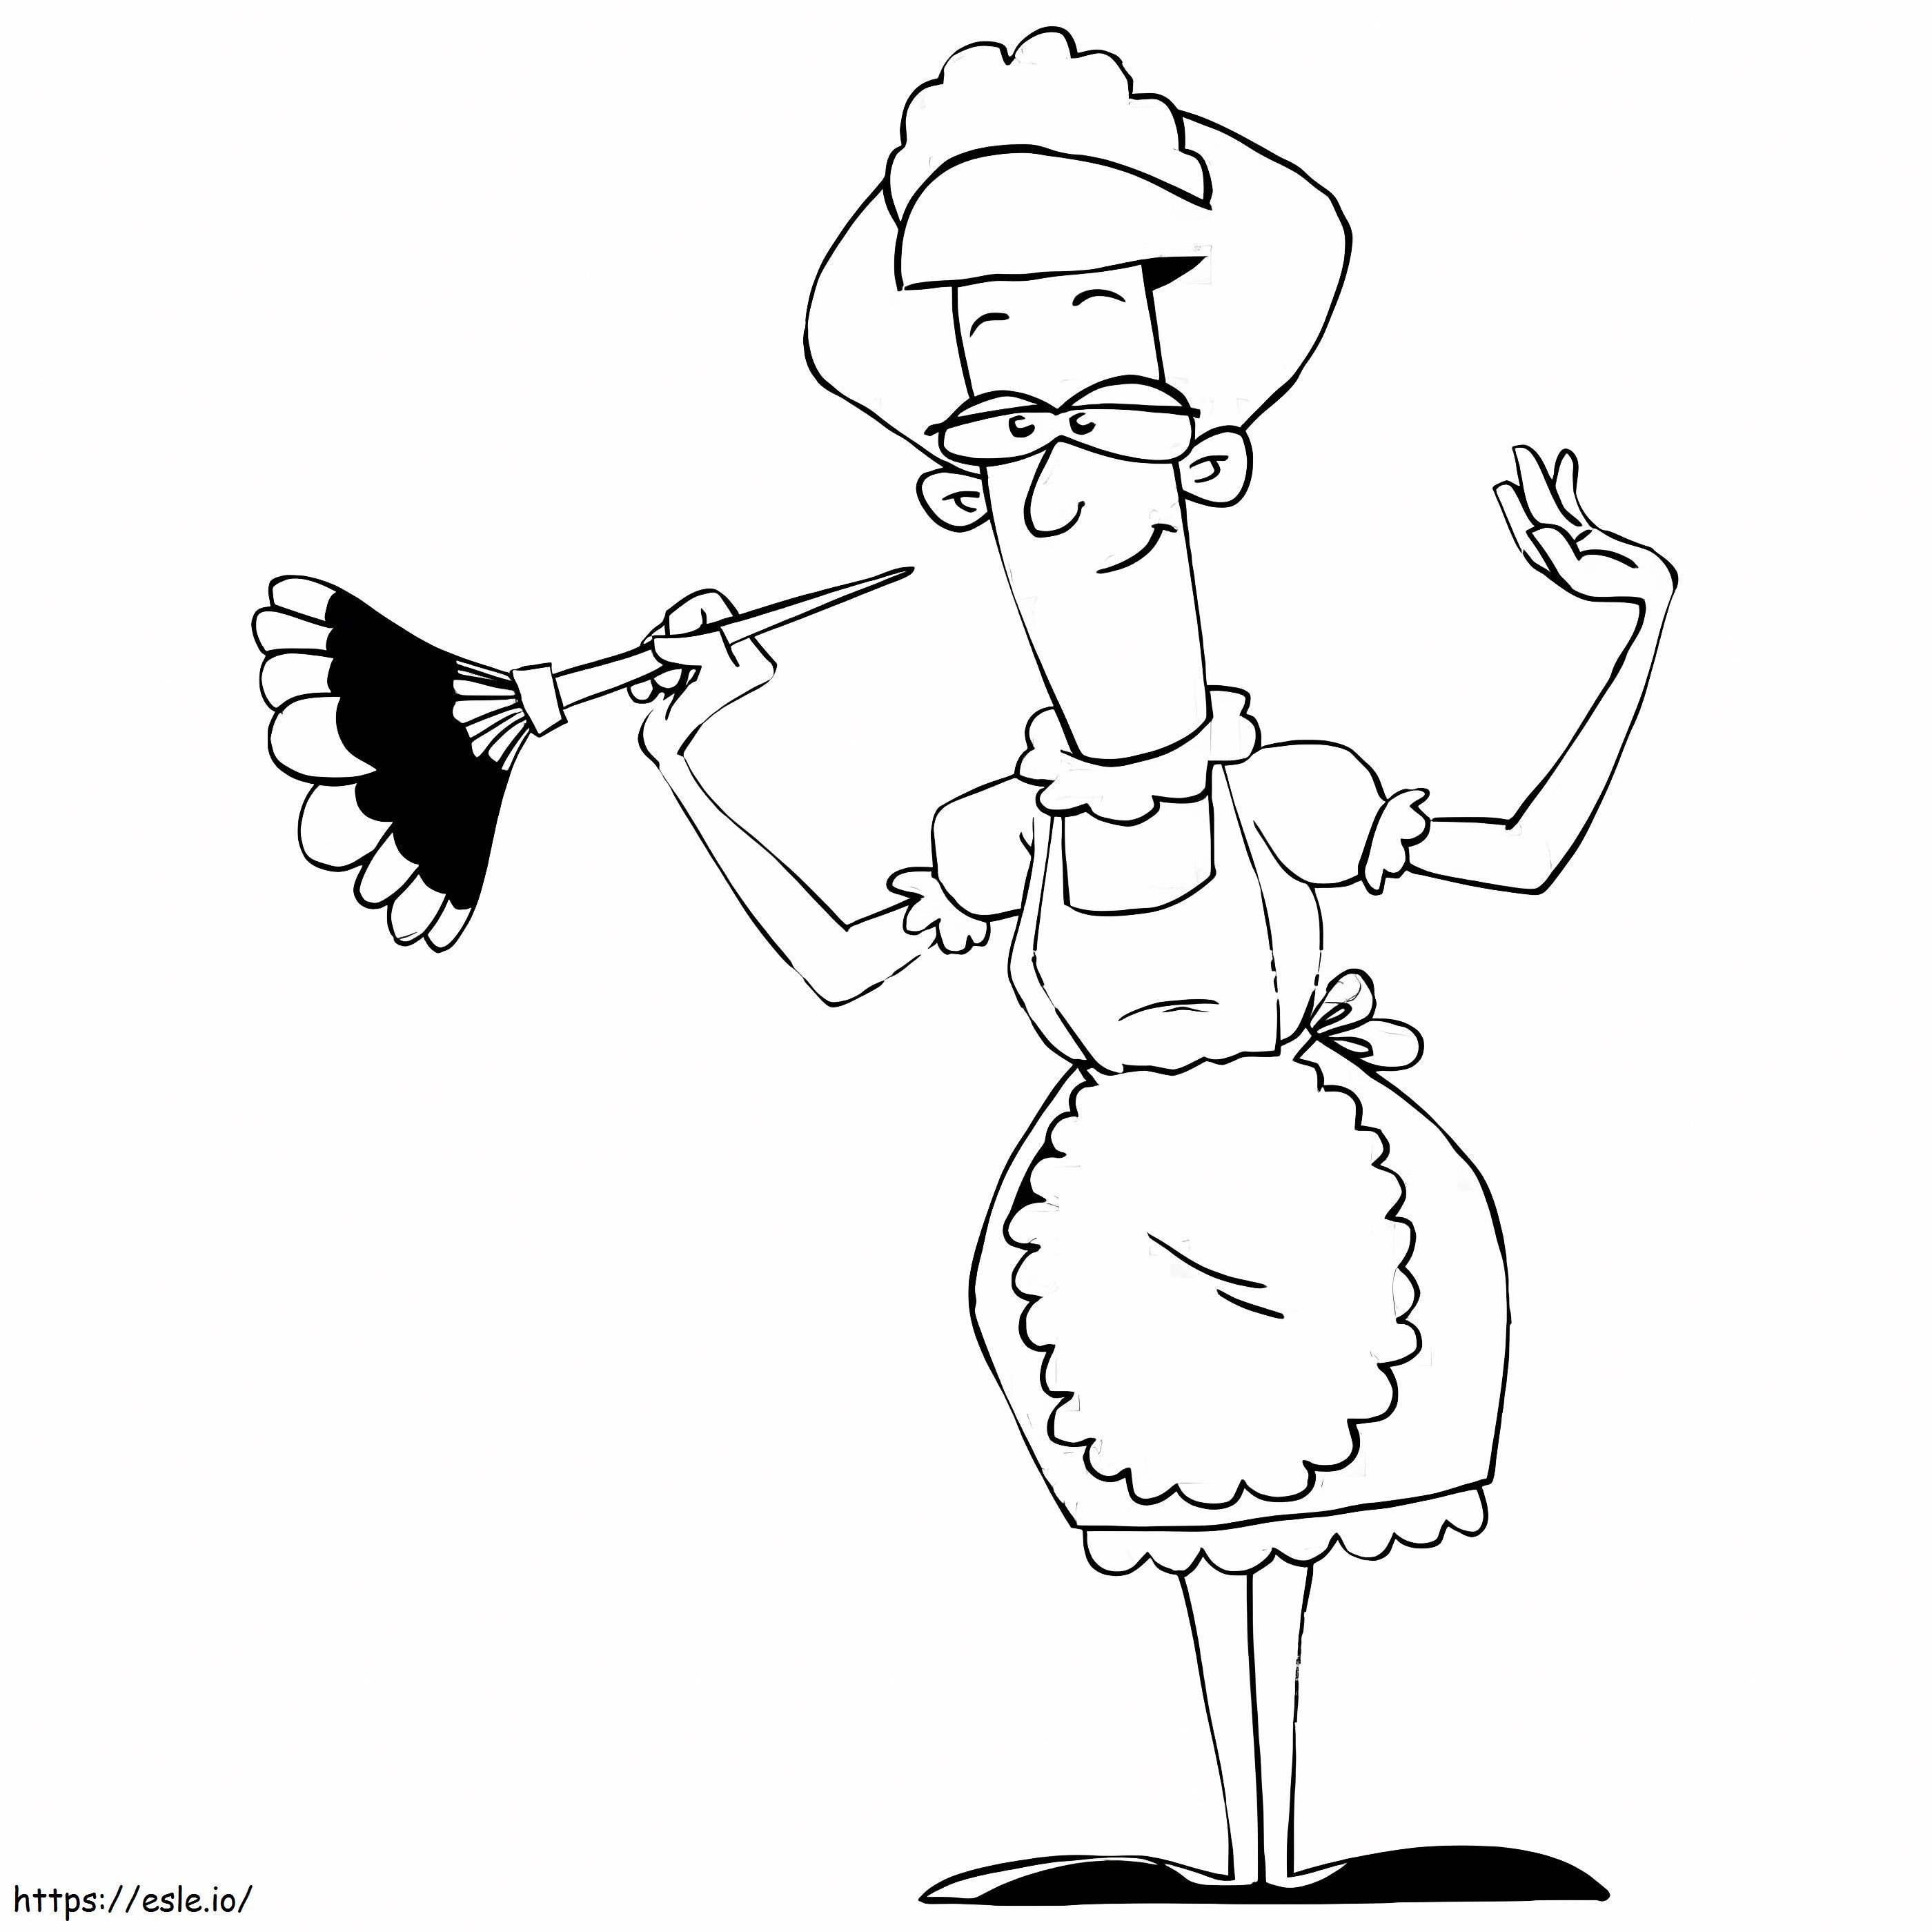 Maid 5 coloring page